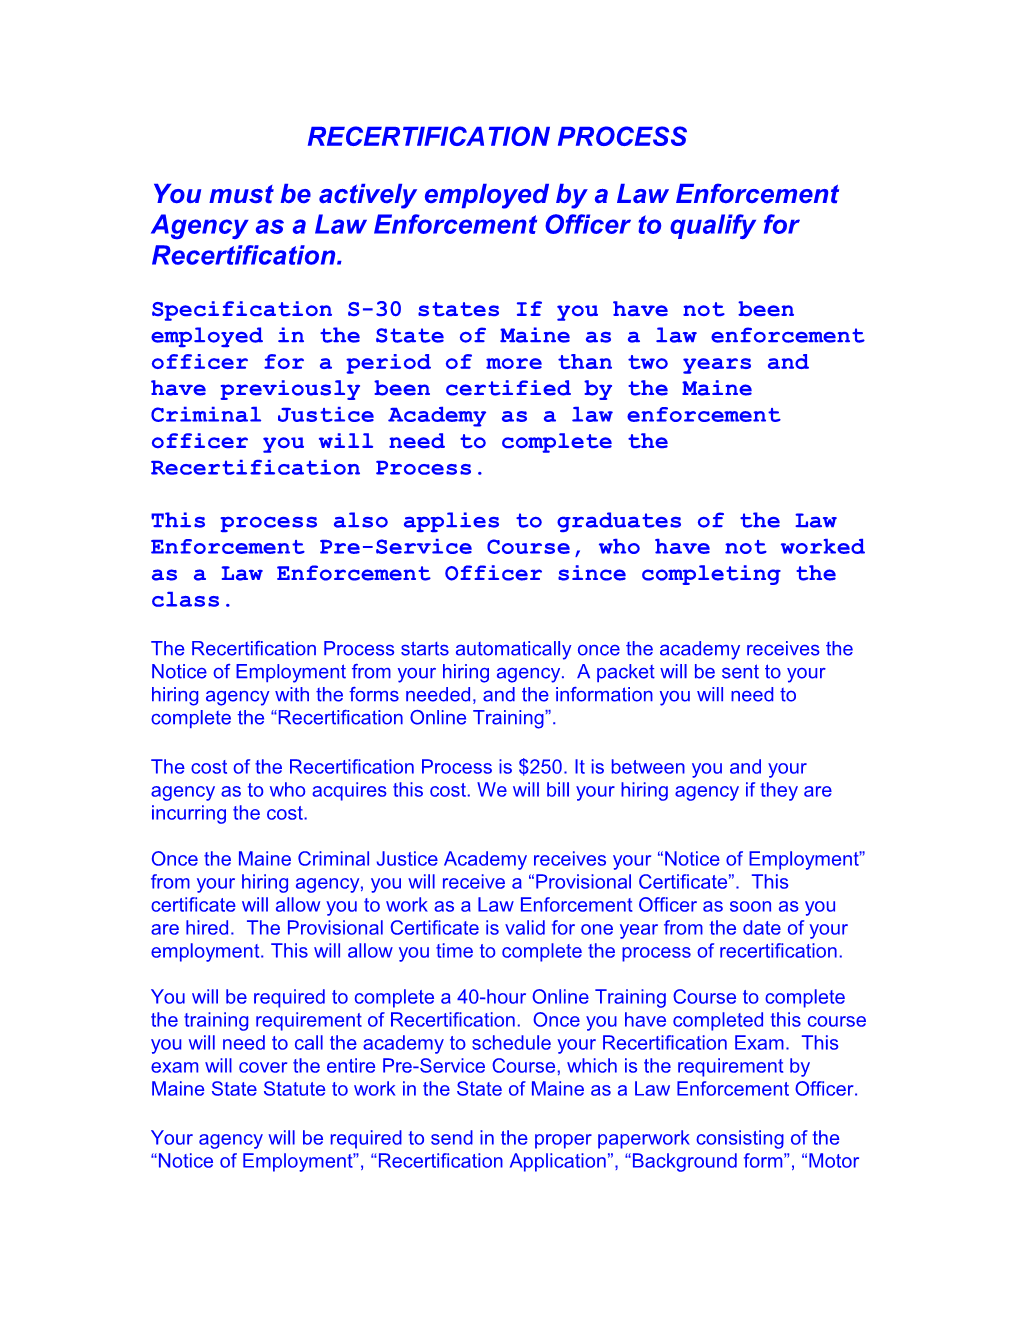 You Must Be Actively Employed by a Law Enforcement Agency As a Law Enforcement Officer